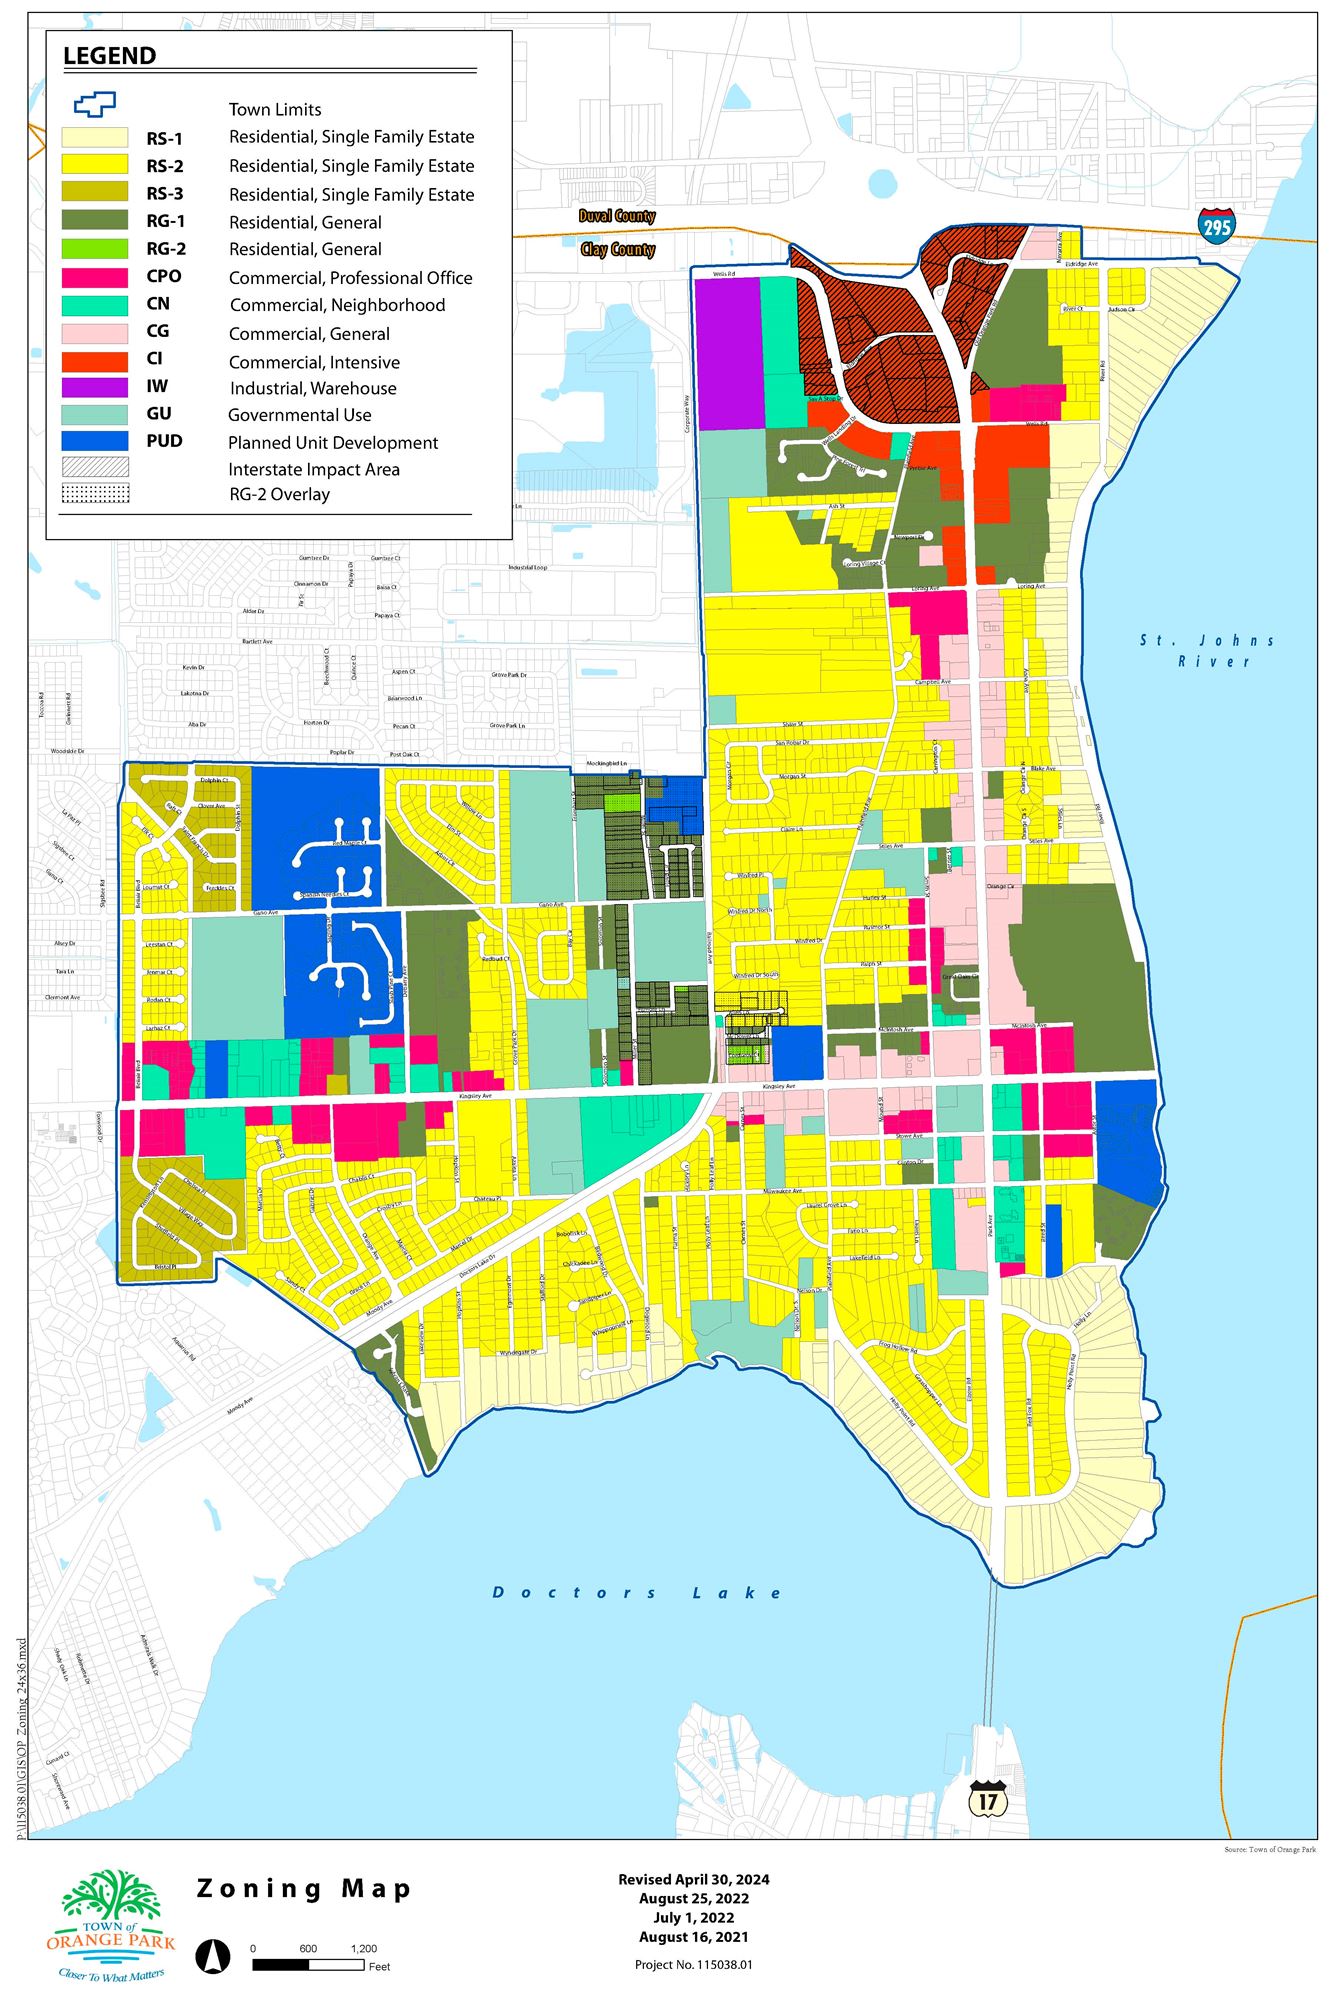 Colorful map of zoning areas